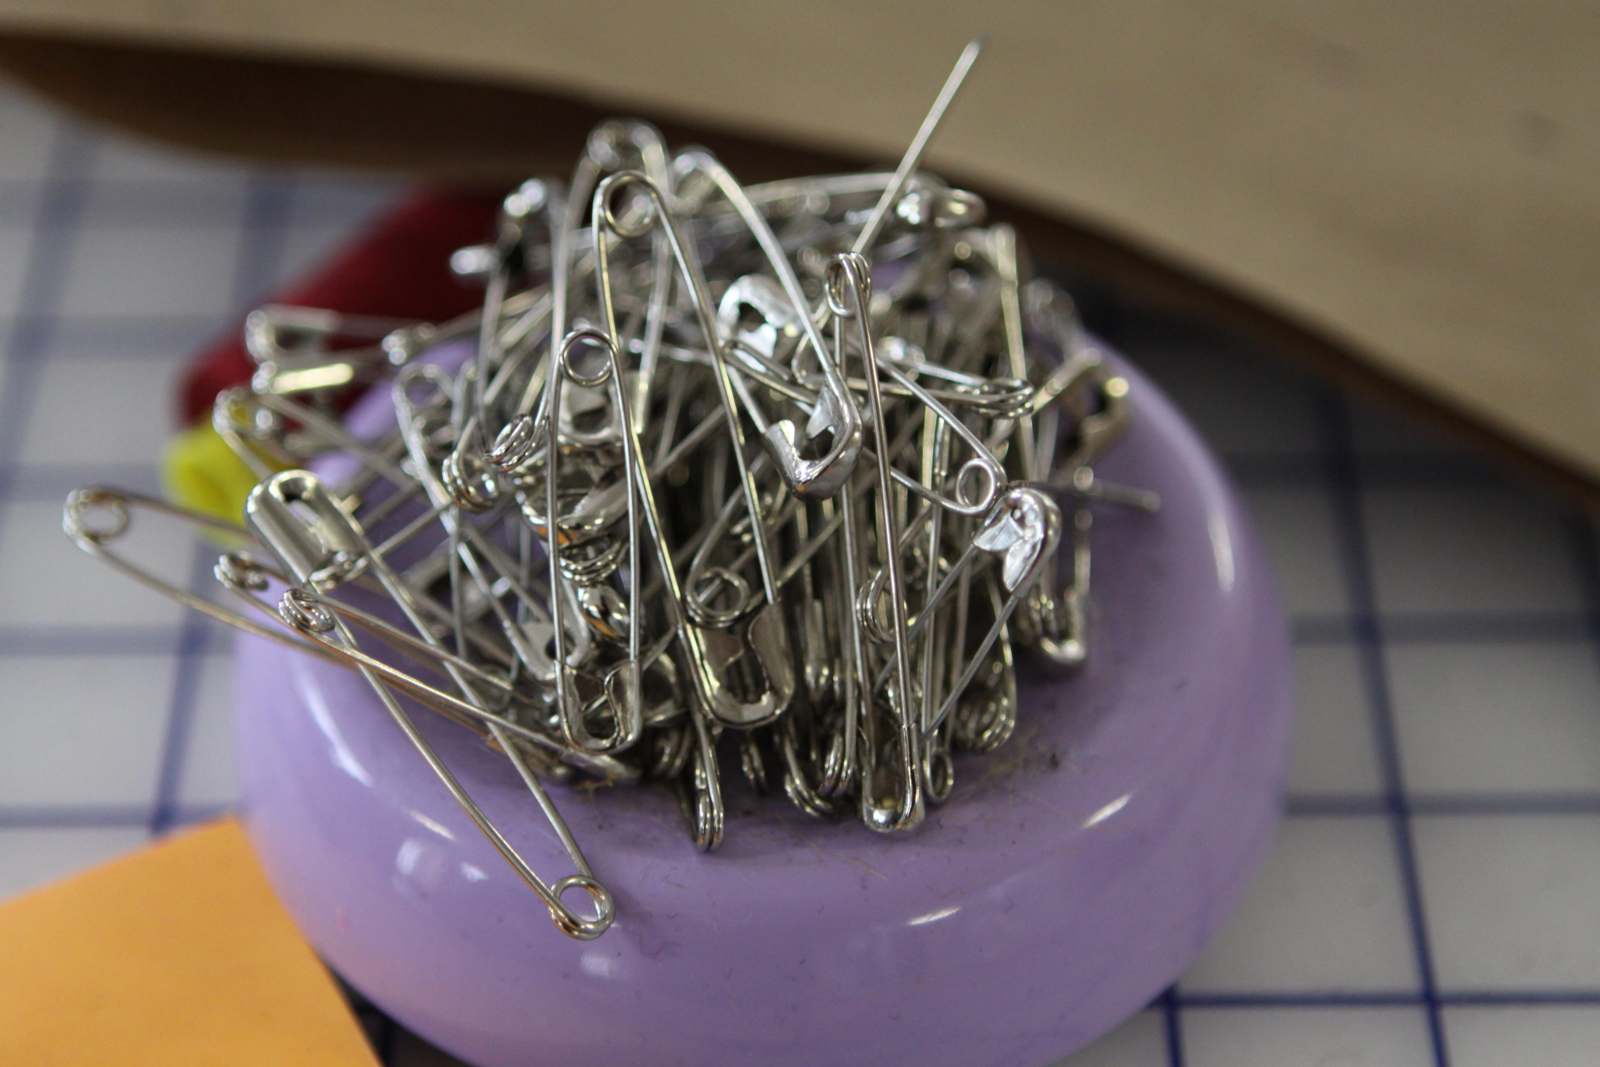 a pile of safety pins